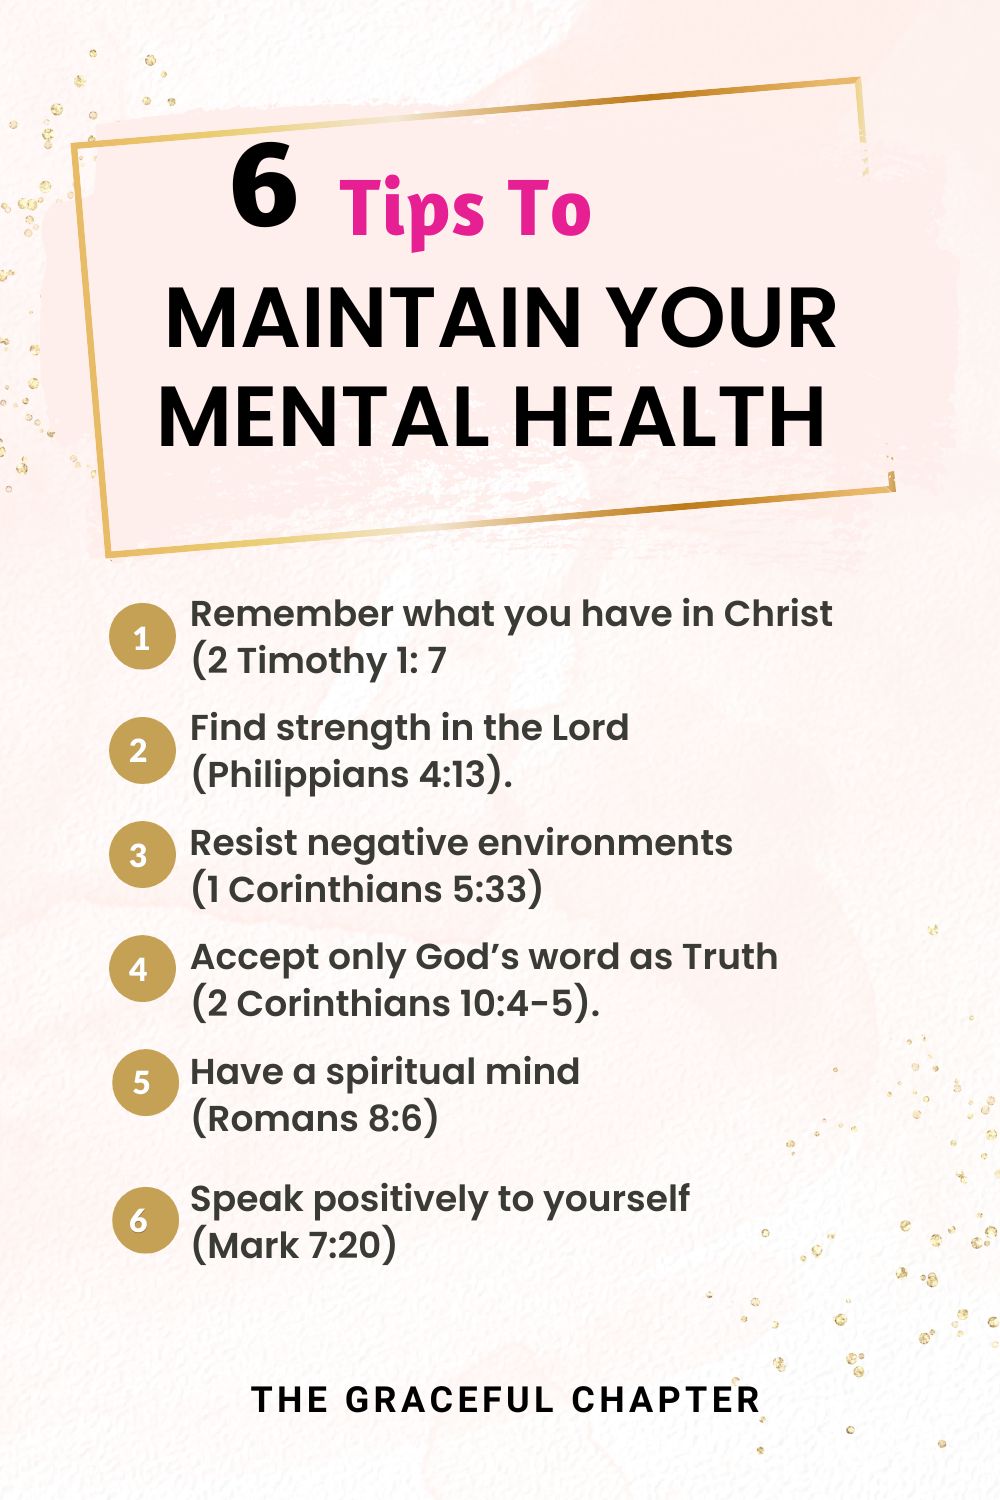 6 Tips To Maintain Your Mental Health